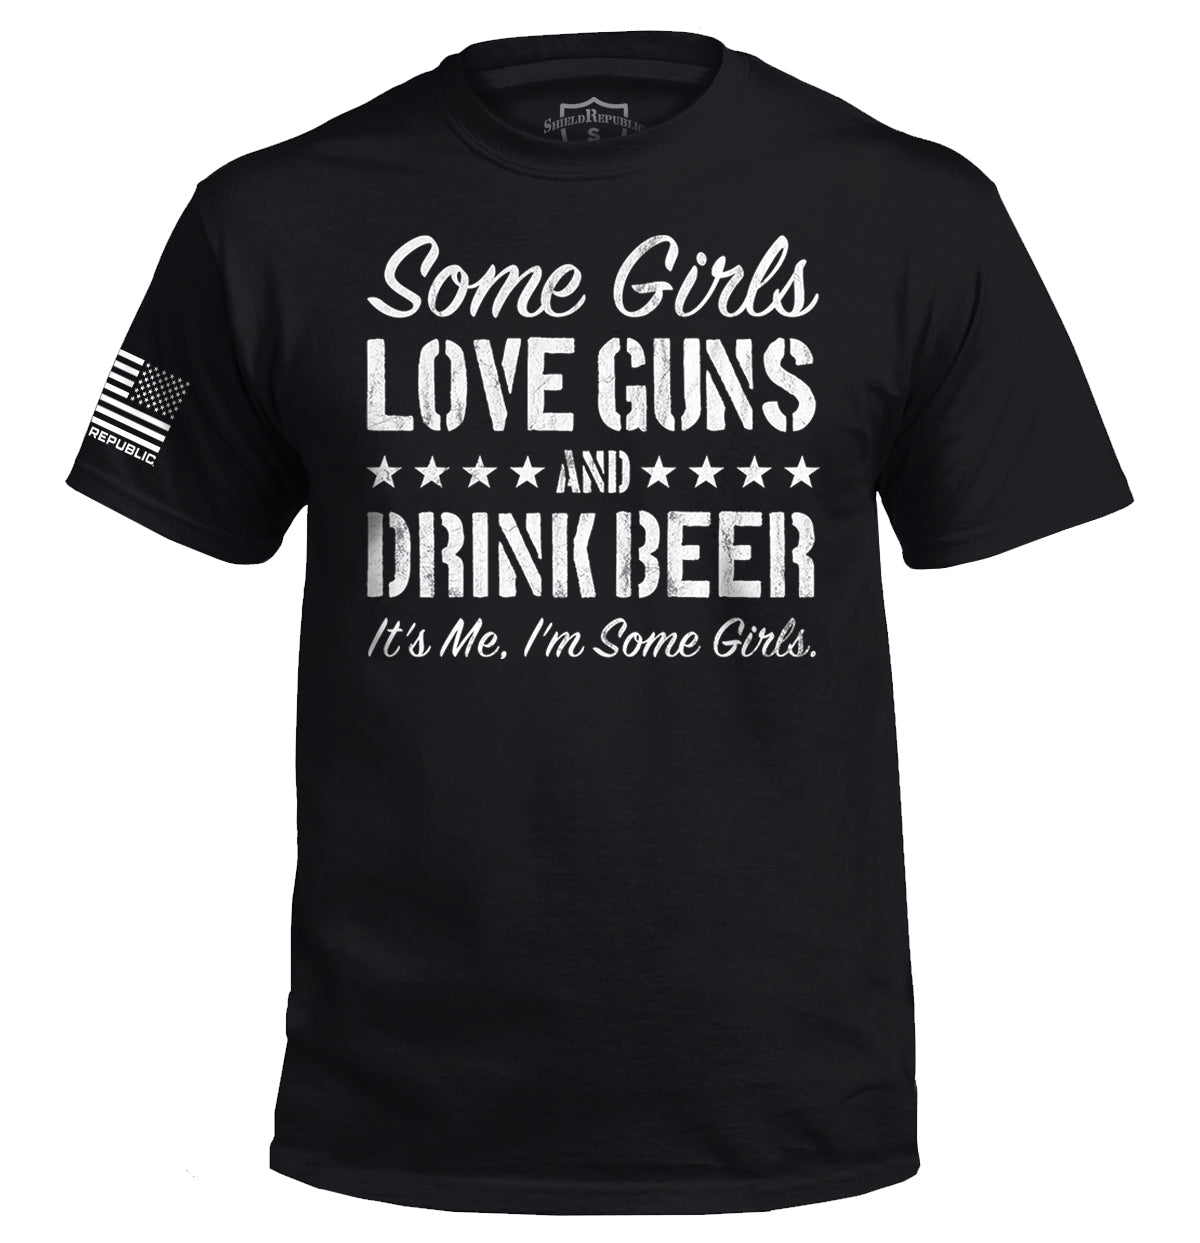 Some Girls Love Guns and Drink Beer Tee